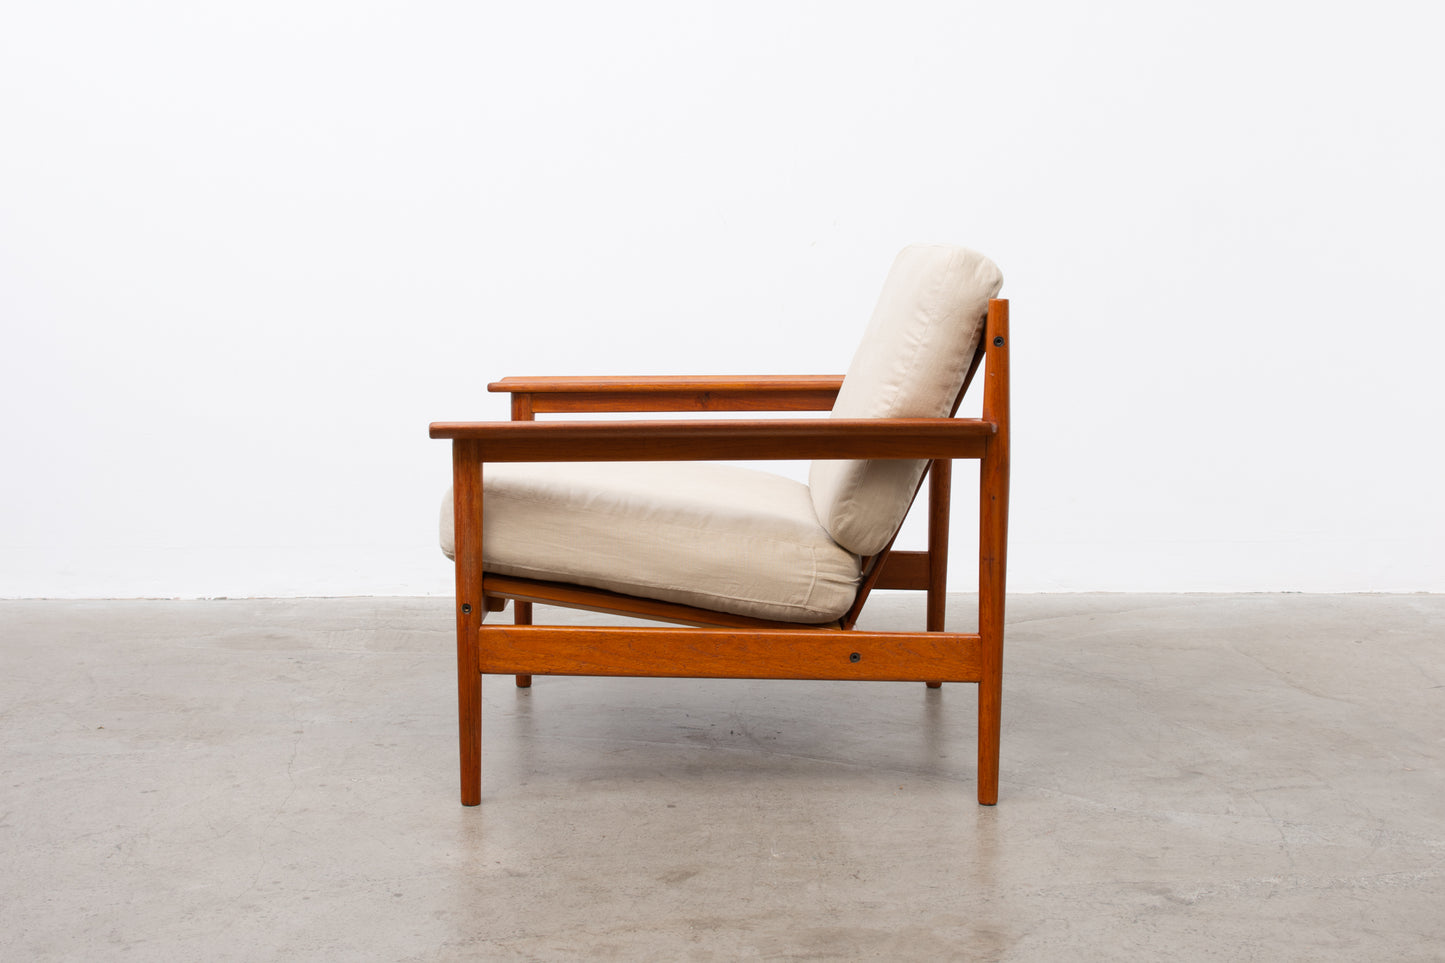 1960s teak lounger with linen cushions